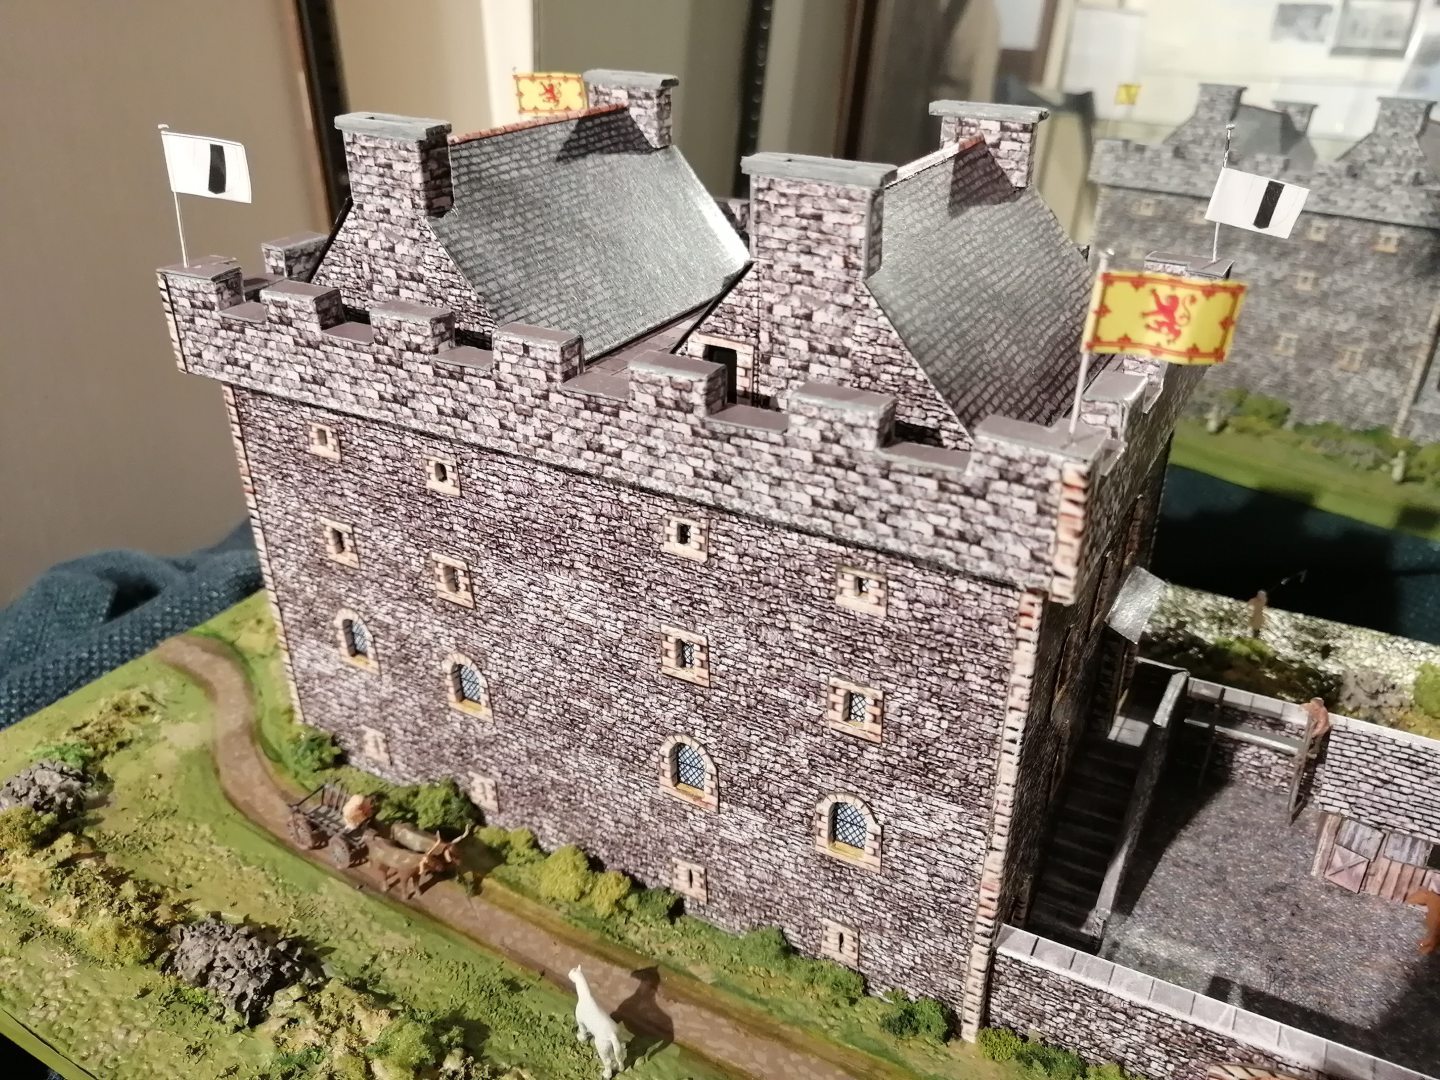 The model of Dunnideer Castle is on 1:150 scale